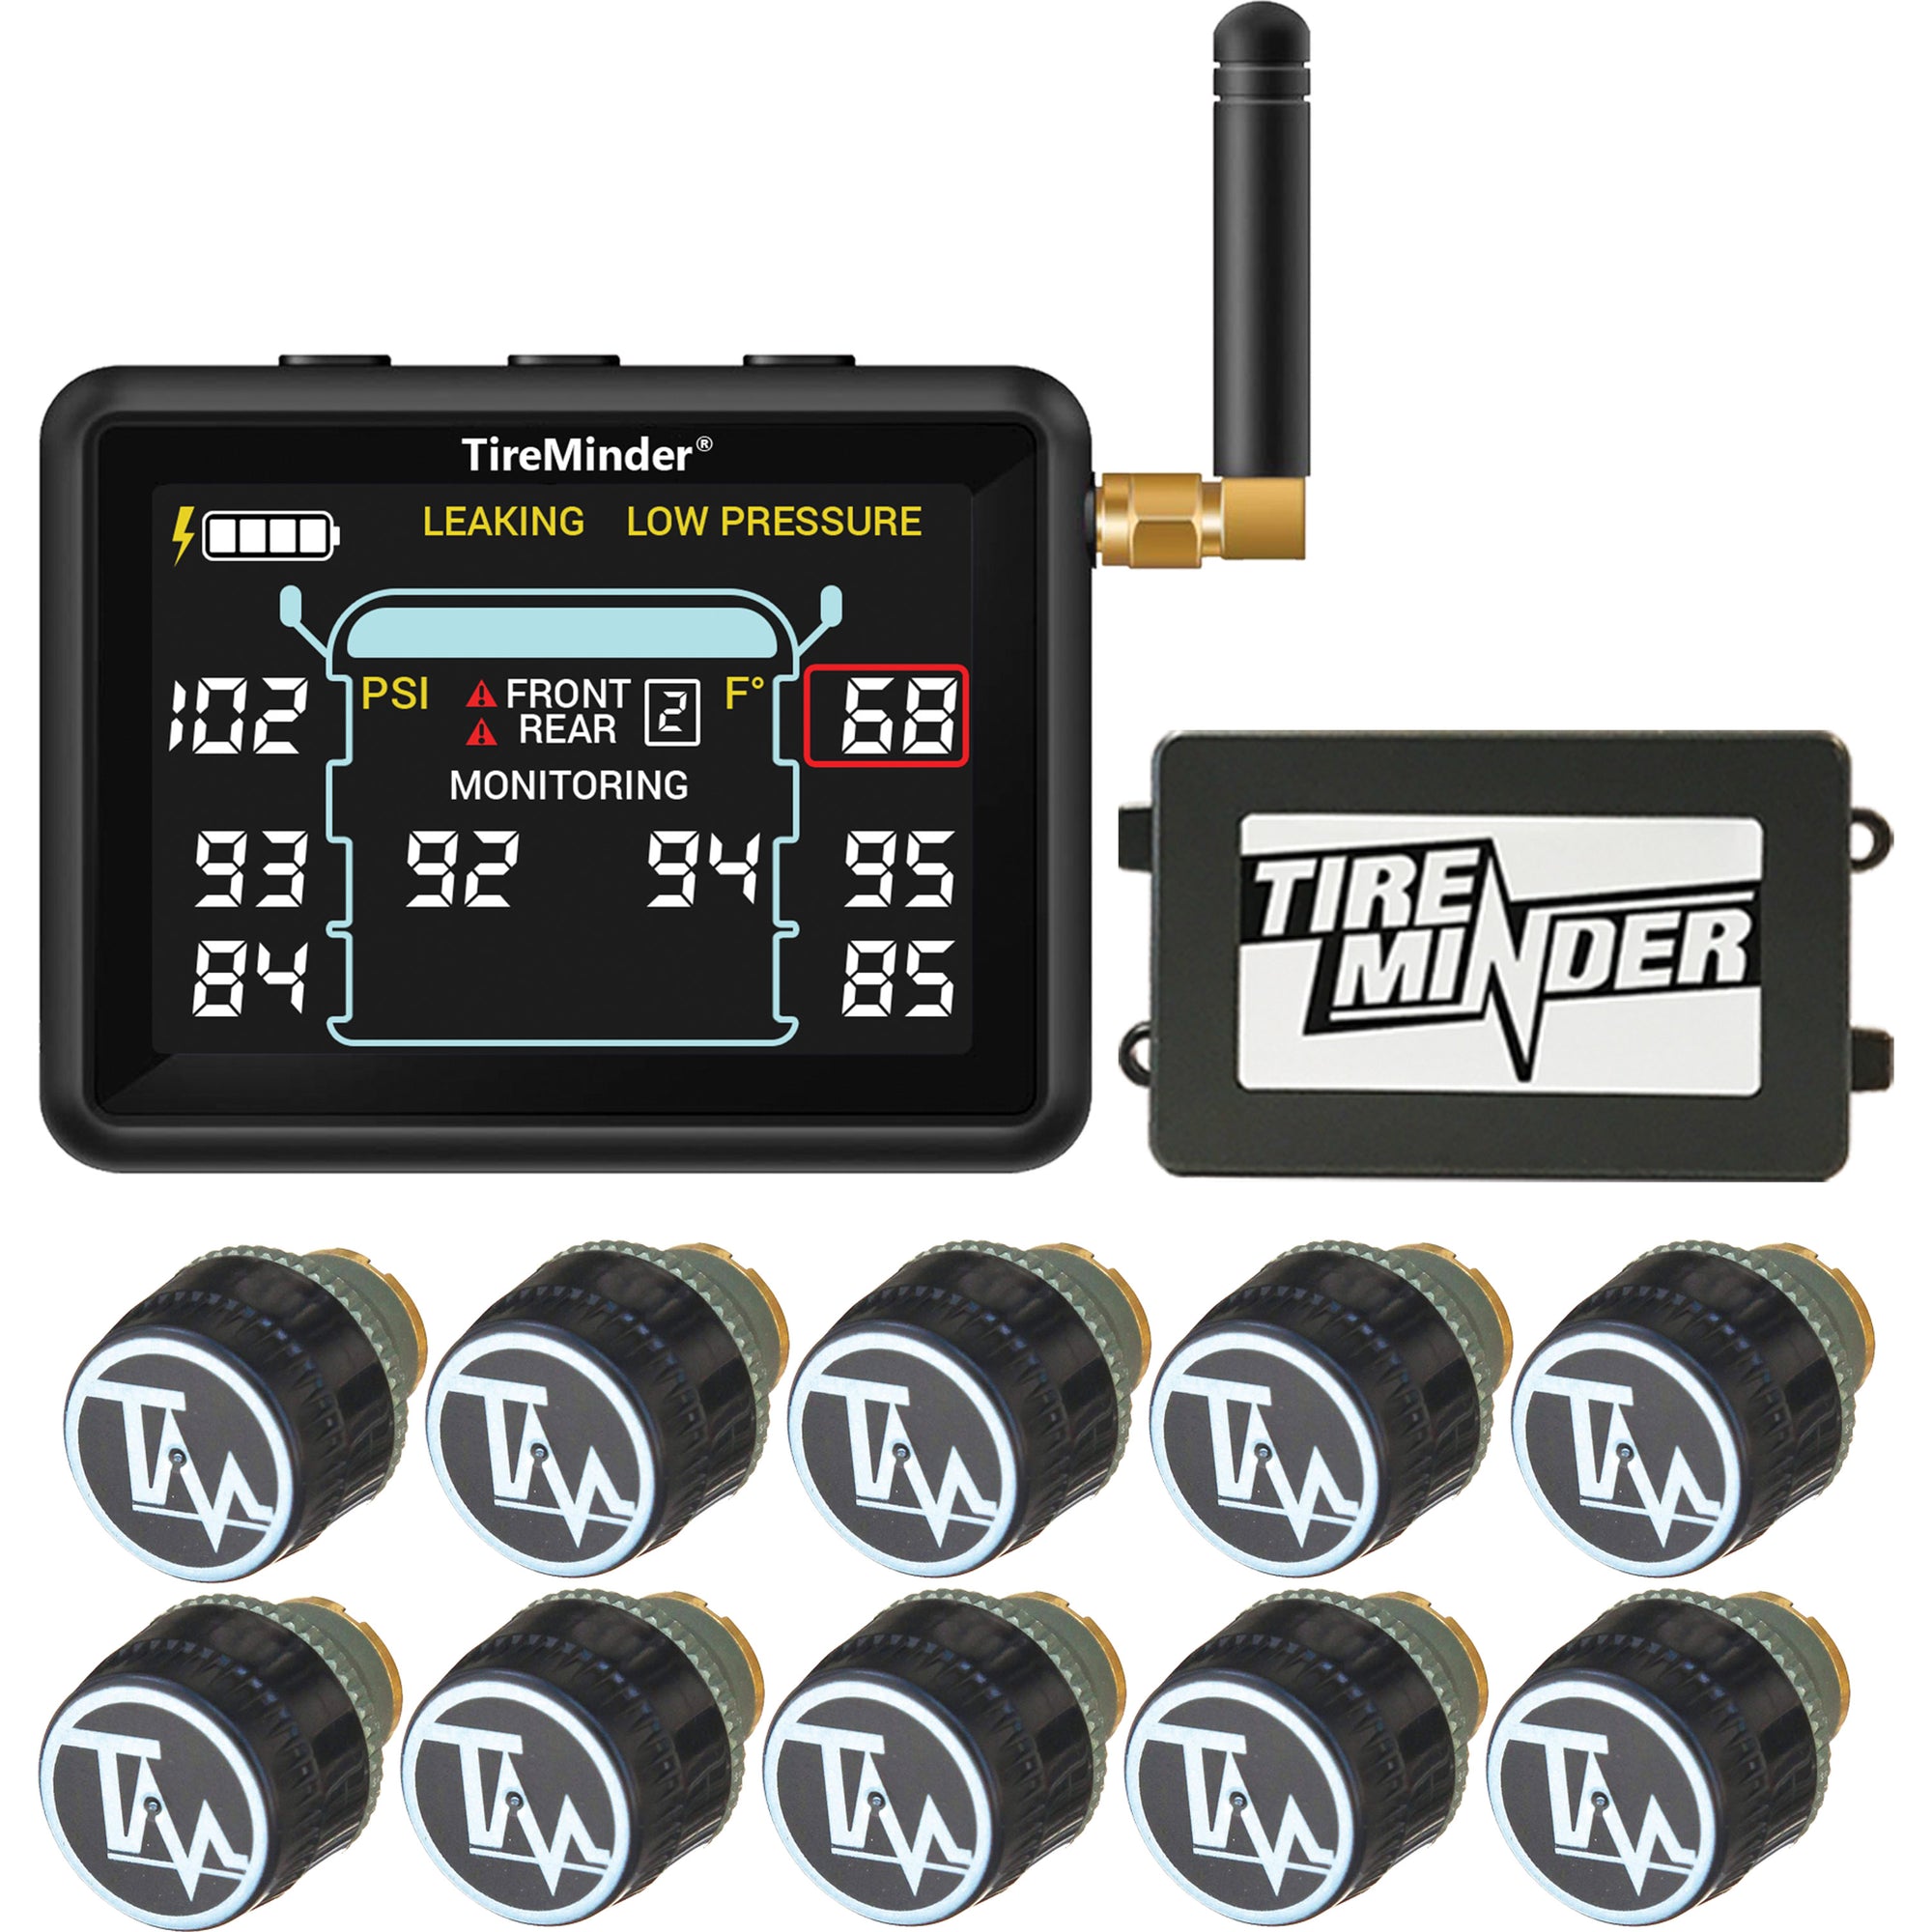 Minder Research TM22143 TireMinder i10 RV TPMS with 10 Transmitters